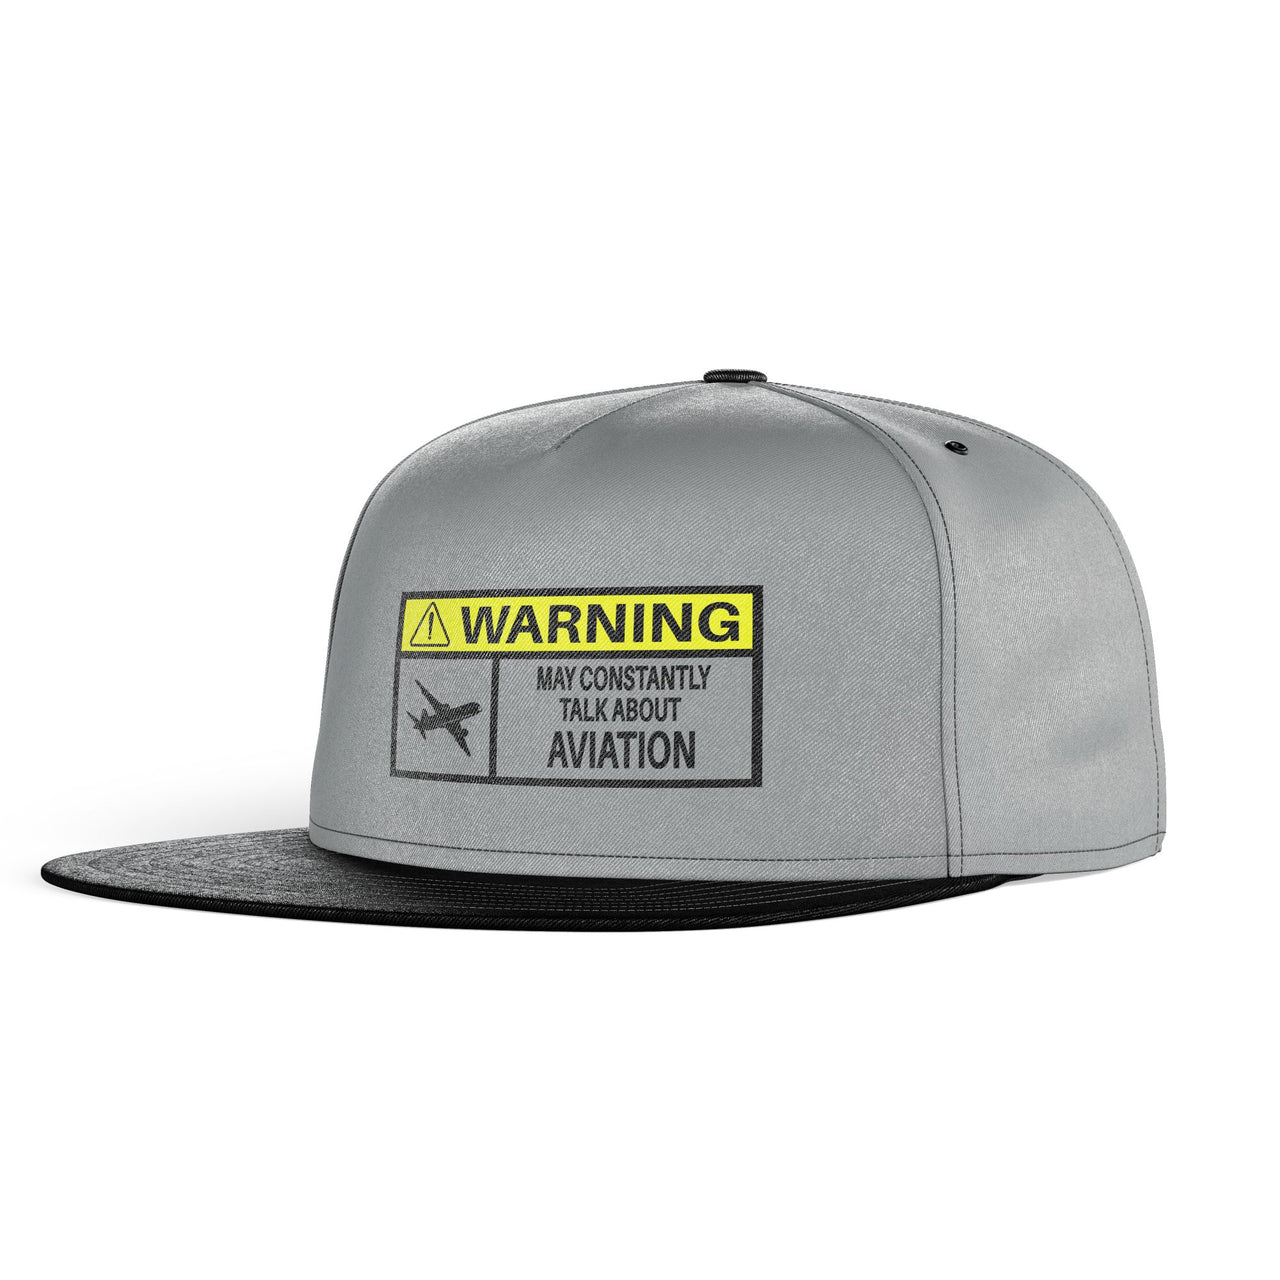 Warning May Constantly Talk About Aviation Designed Snapback Caps & Hats